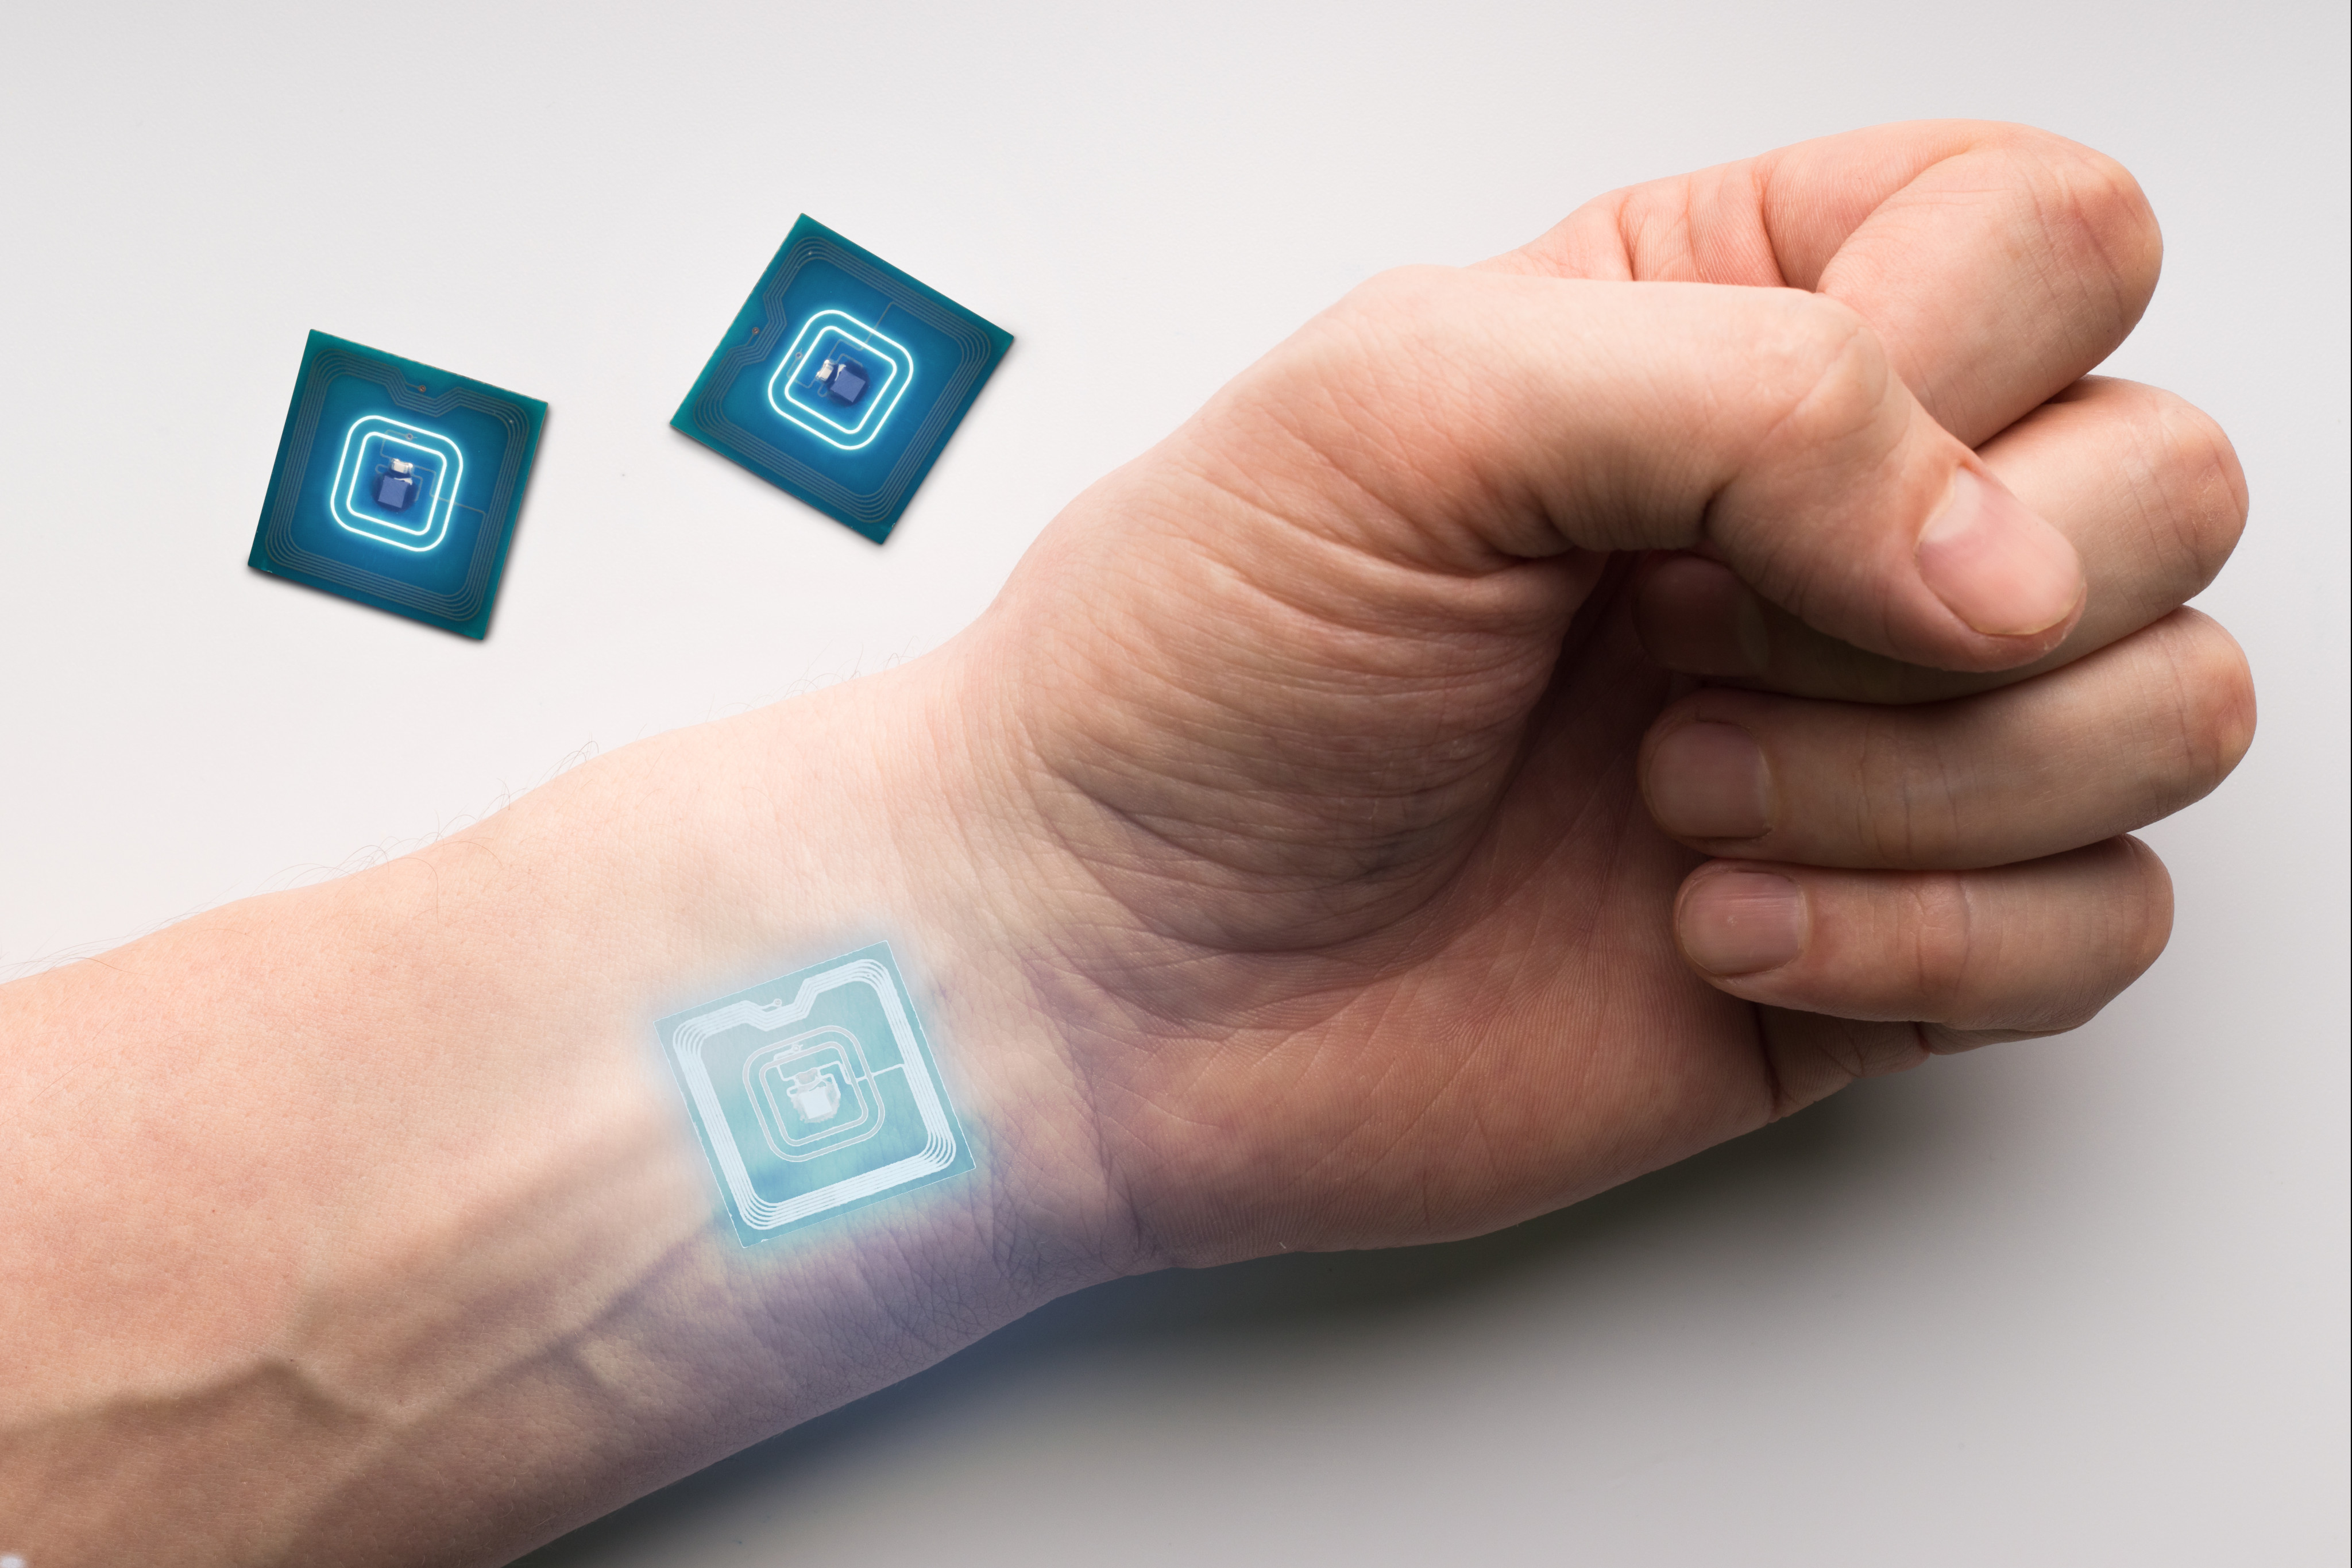 A new biodegradable, wireless power supply system could help run drug delivery implants in the future. Photo: Shutterstock